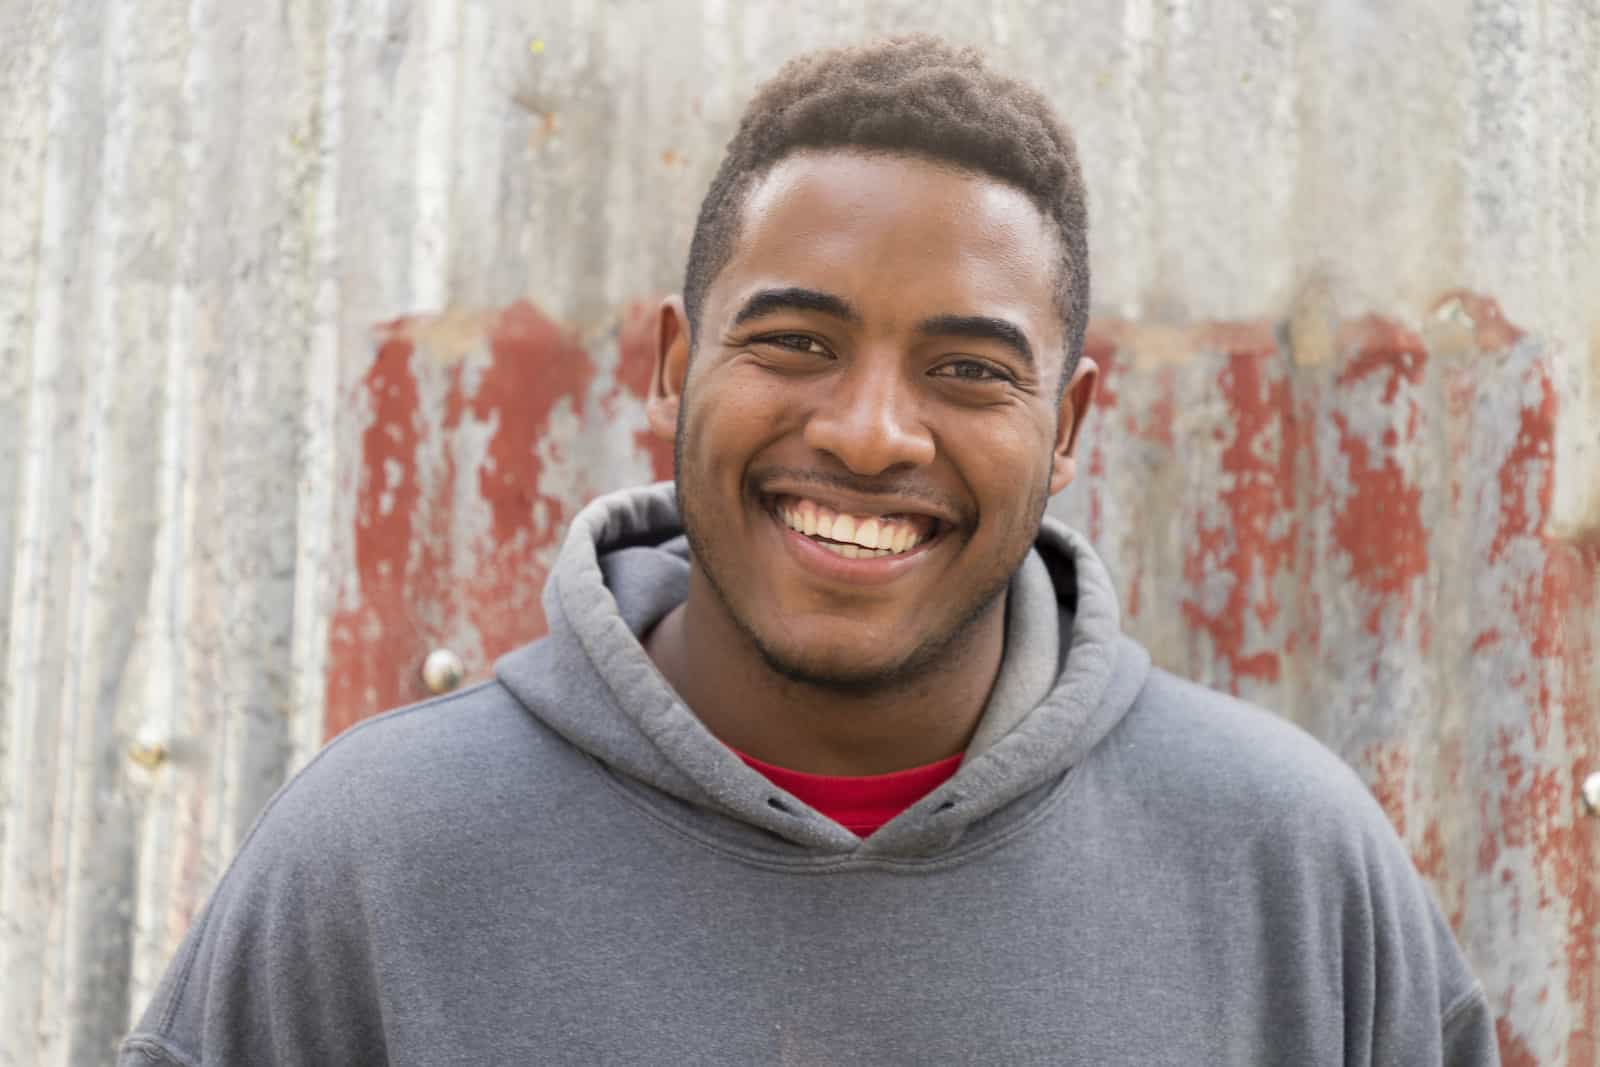 A man in a grey hooded sweatshirt smiles at the camera.